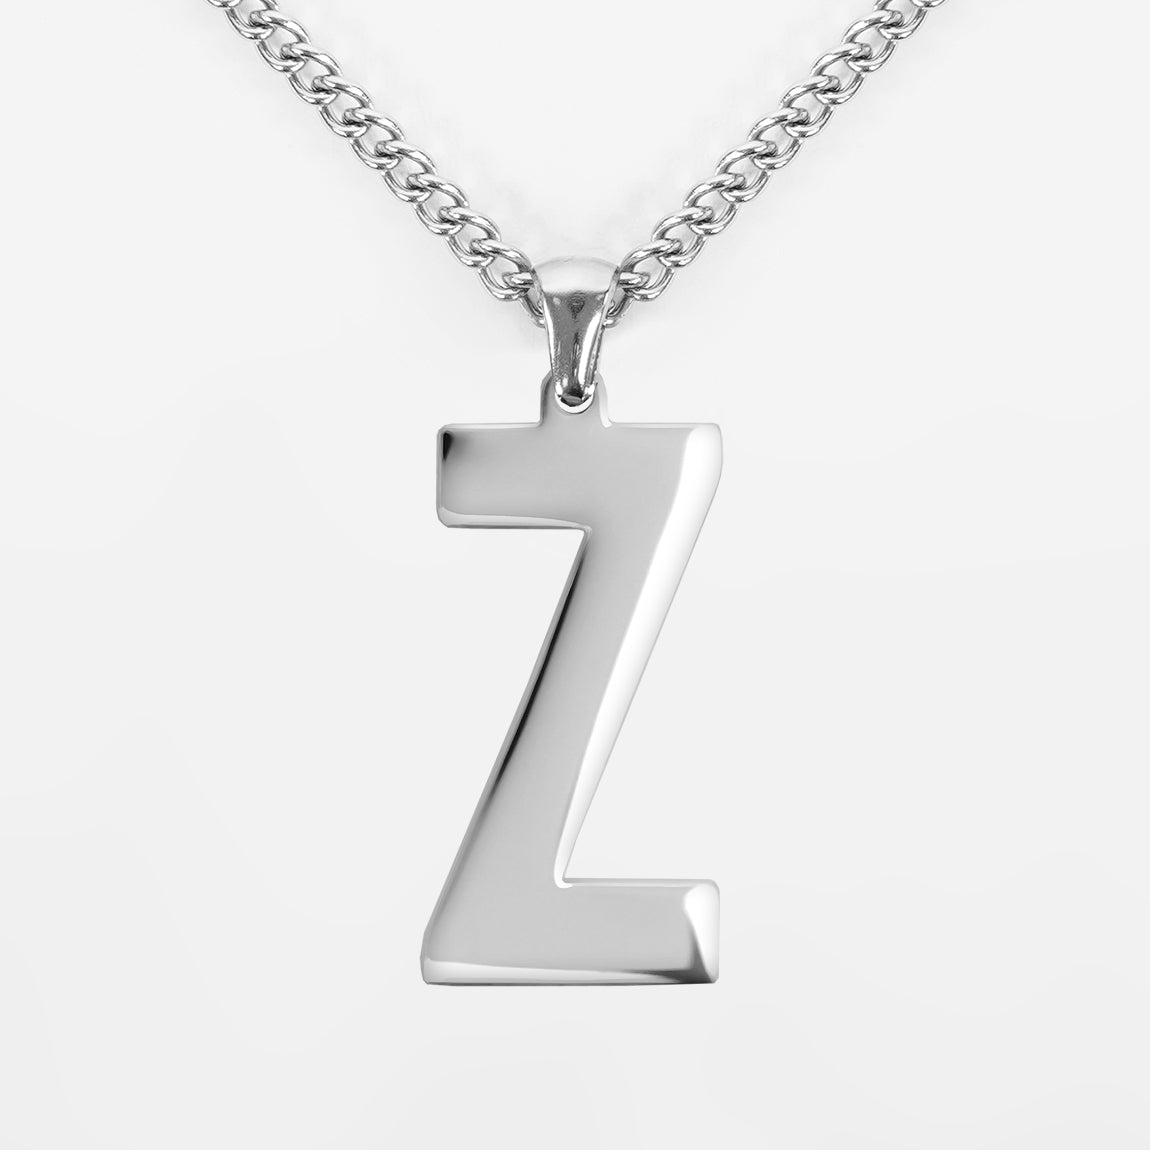 Z Letter Pendant with Chain Necklace - Stainless Steel